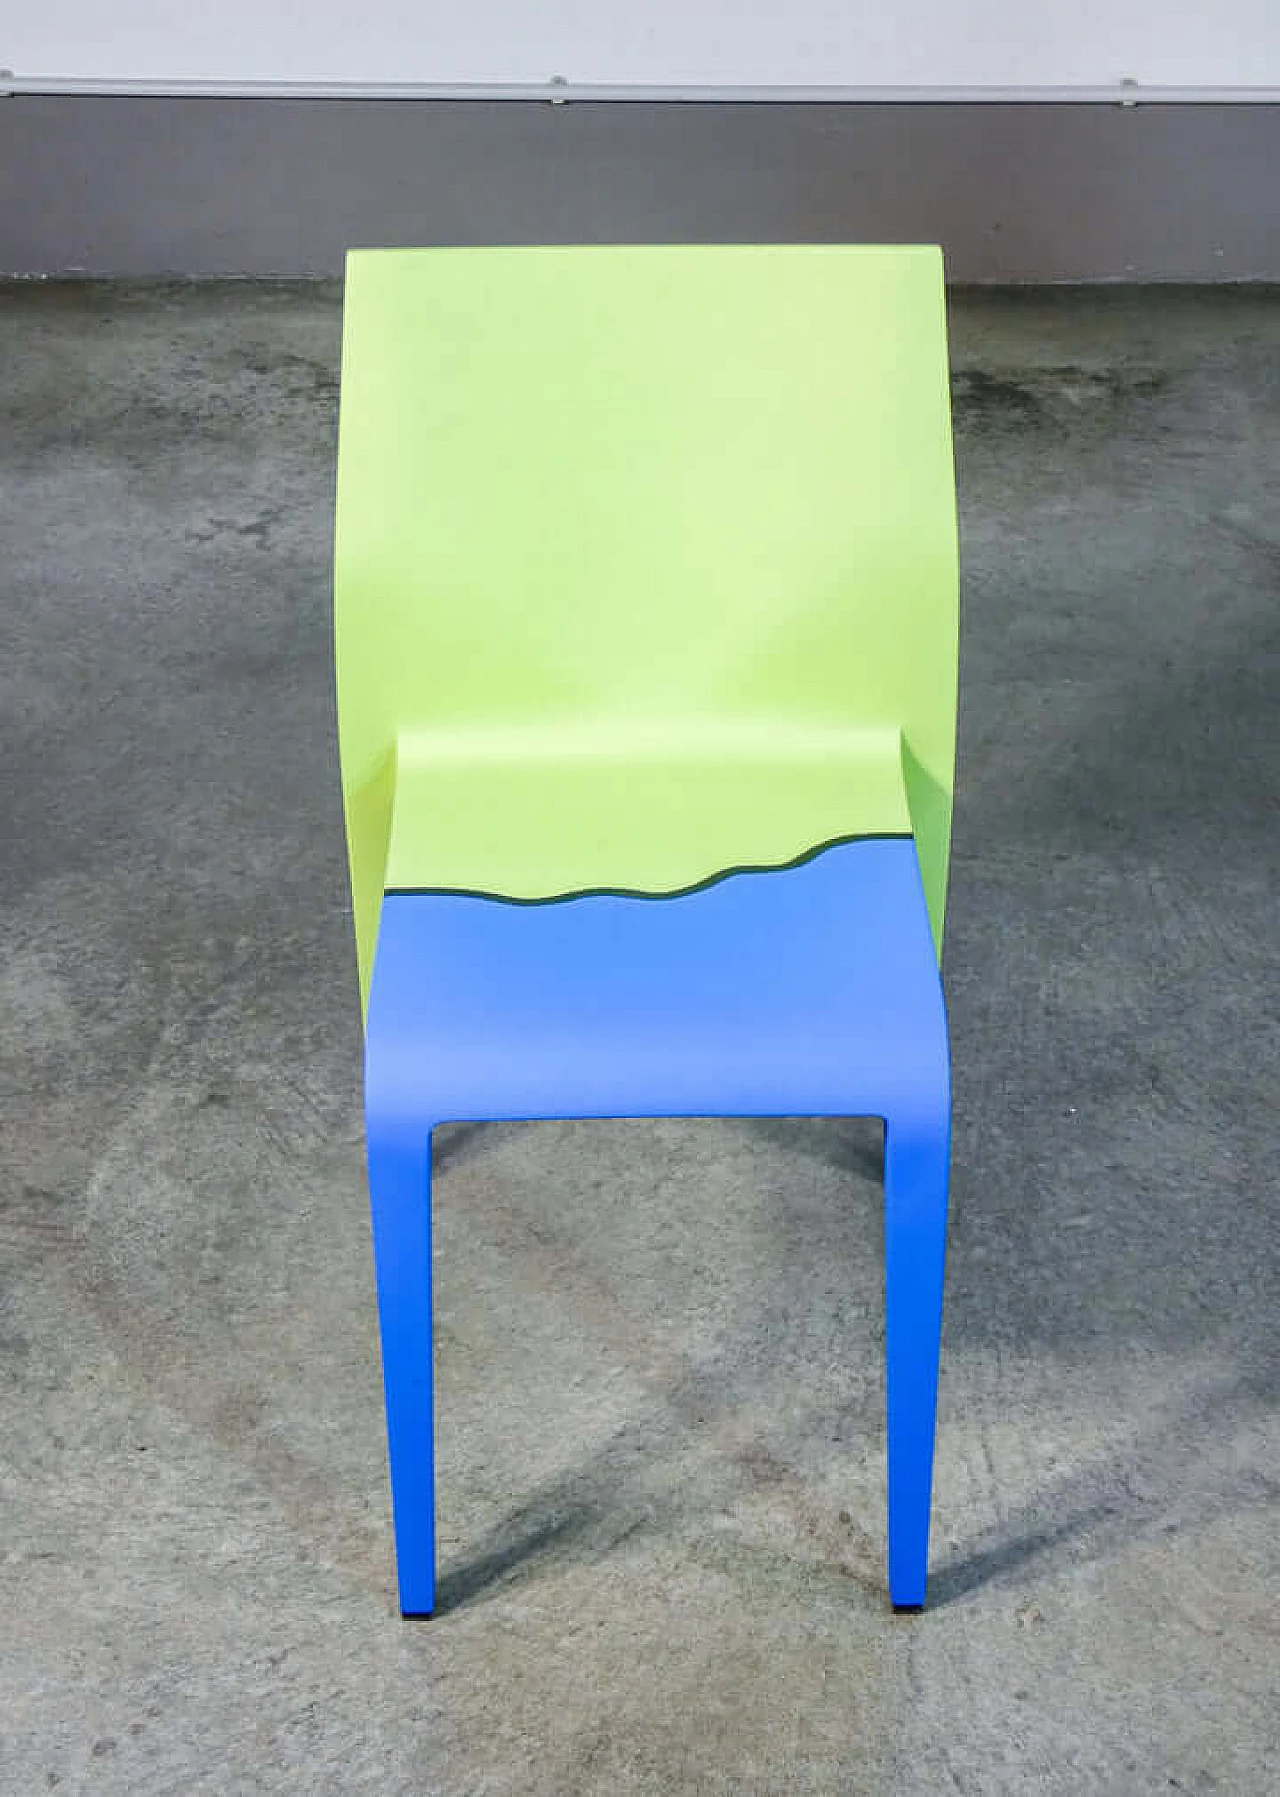 Laleggera 44 chair by Riccardo Blumer for Alias painted by Michelangelo Pistoletto, 2009 3